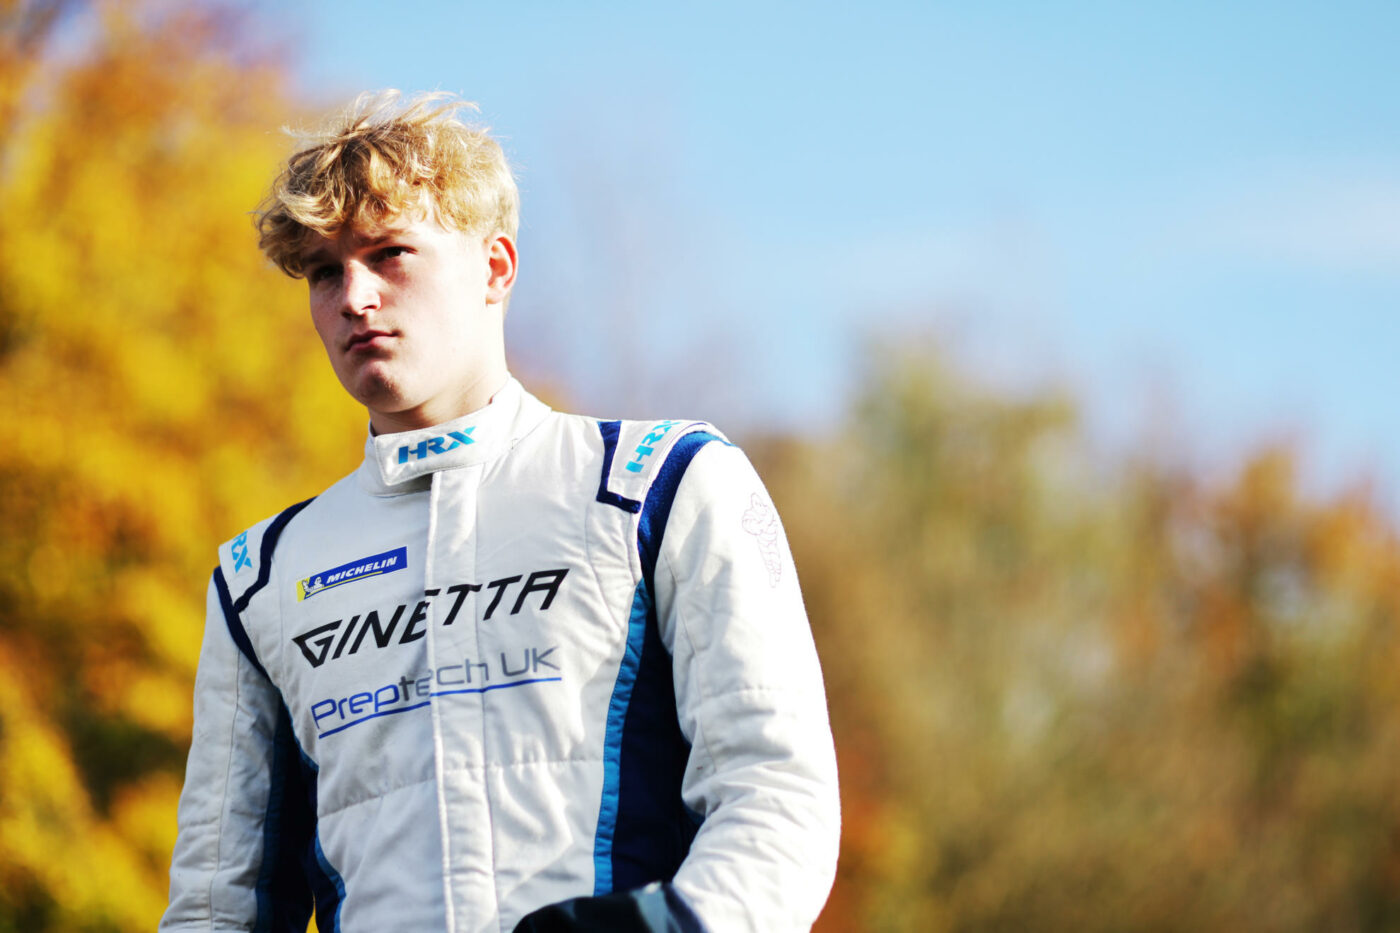 Tom Spragg joins Preptech for his first year of racing in the Ginetta Junior Championship